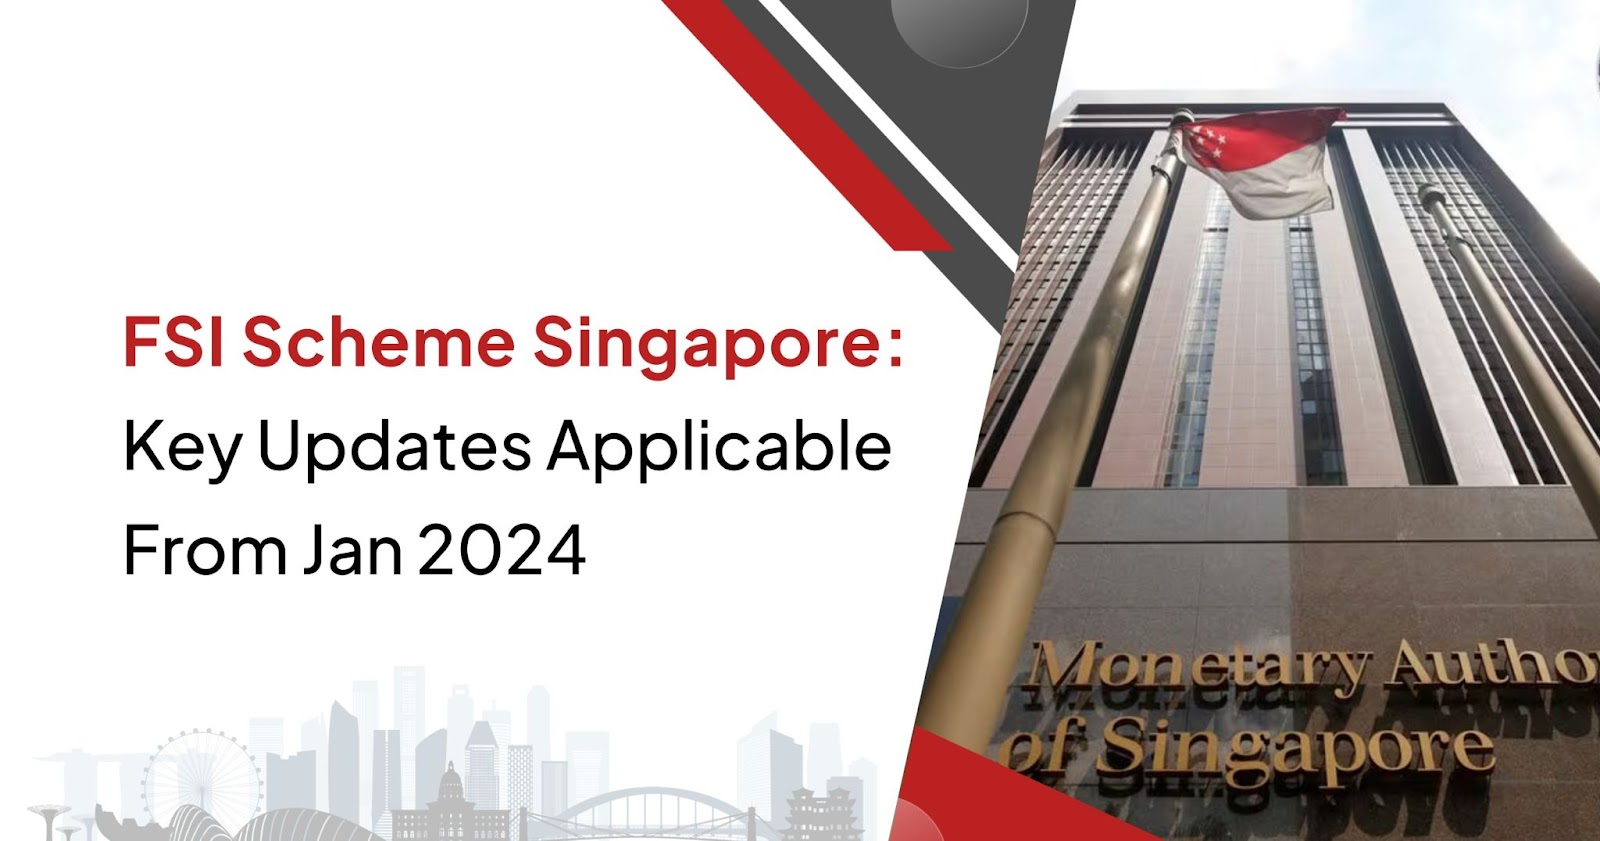 FSI Scheme Singapore: Key Updates Applicable From Jan 2024